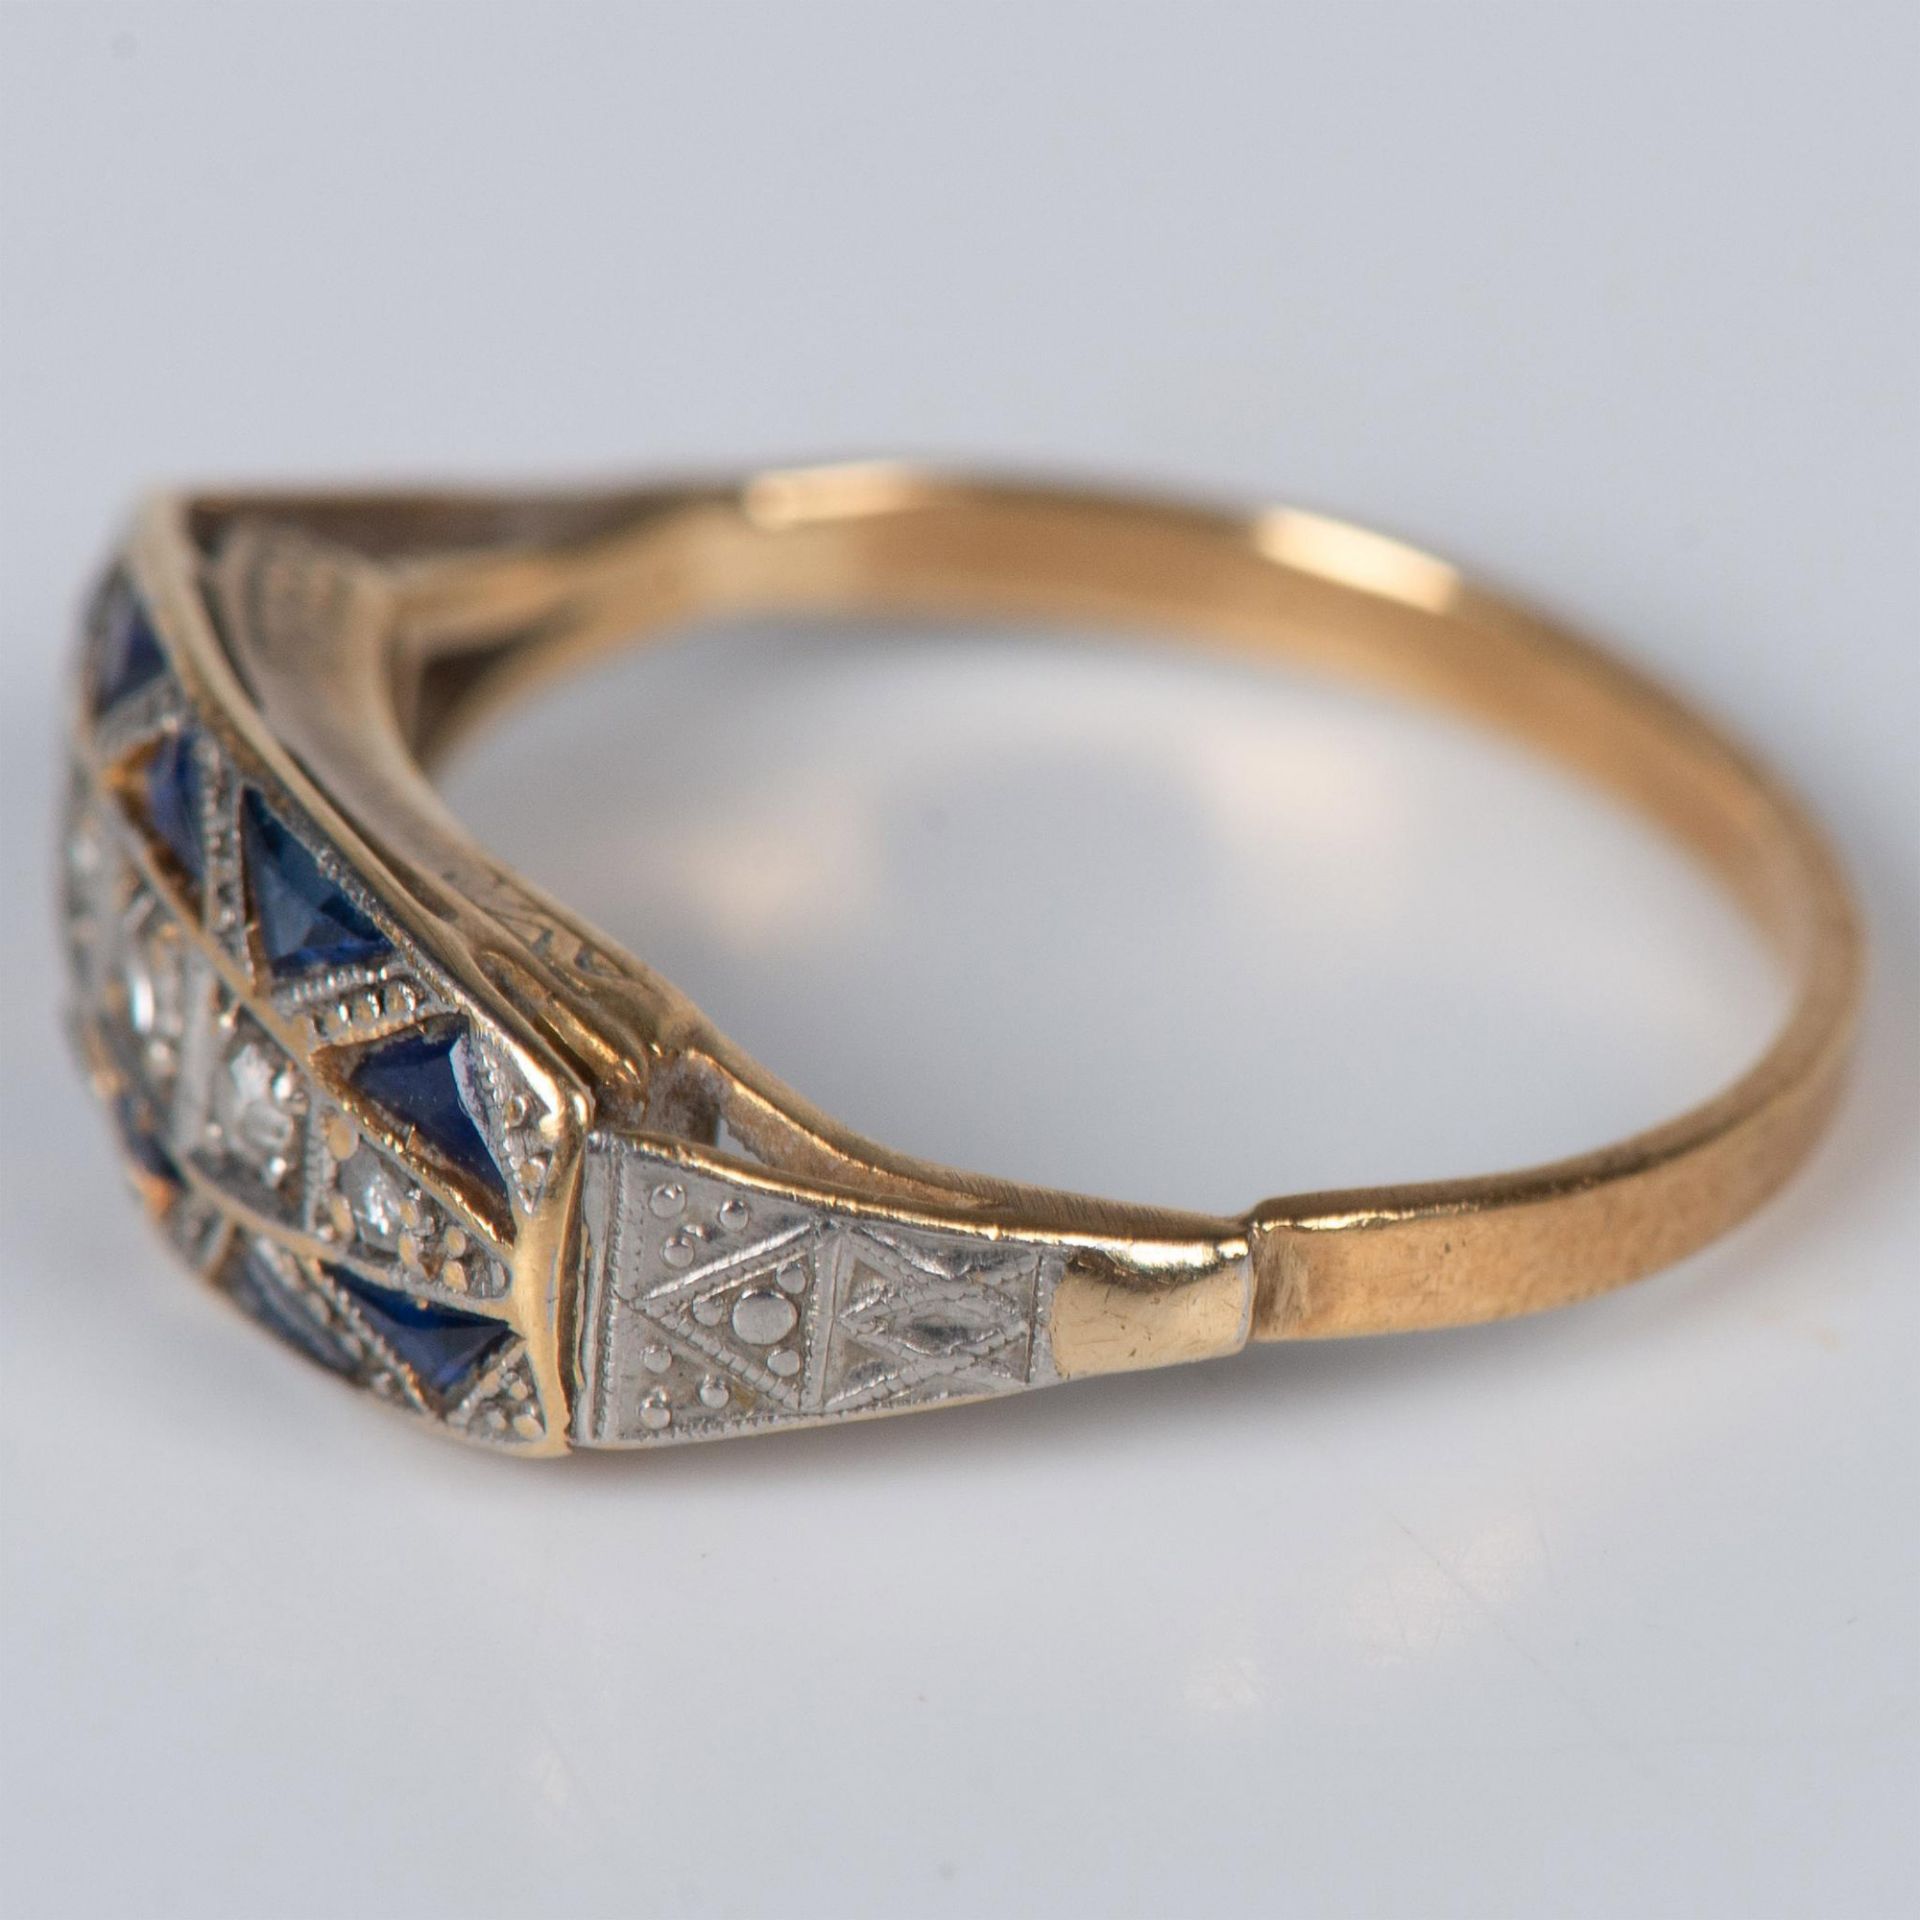 Art Deco Gold, Diamonds and Sapphire Ring - Image 3 of 5